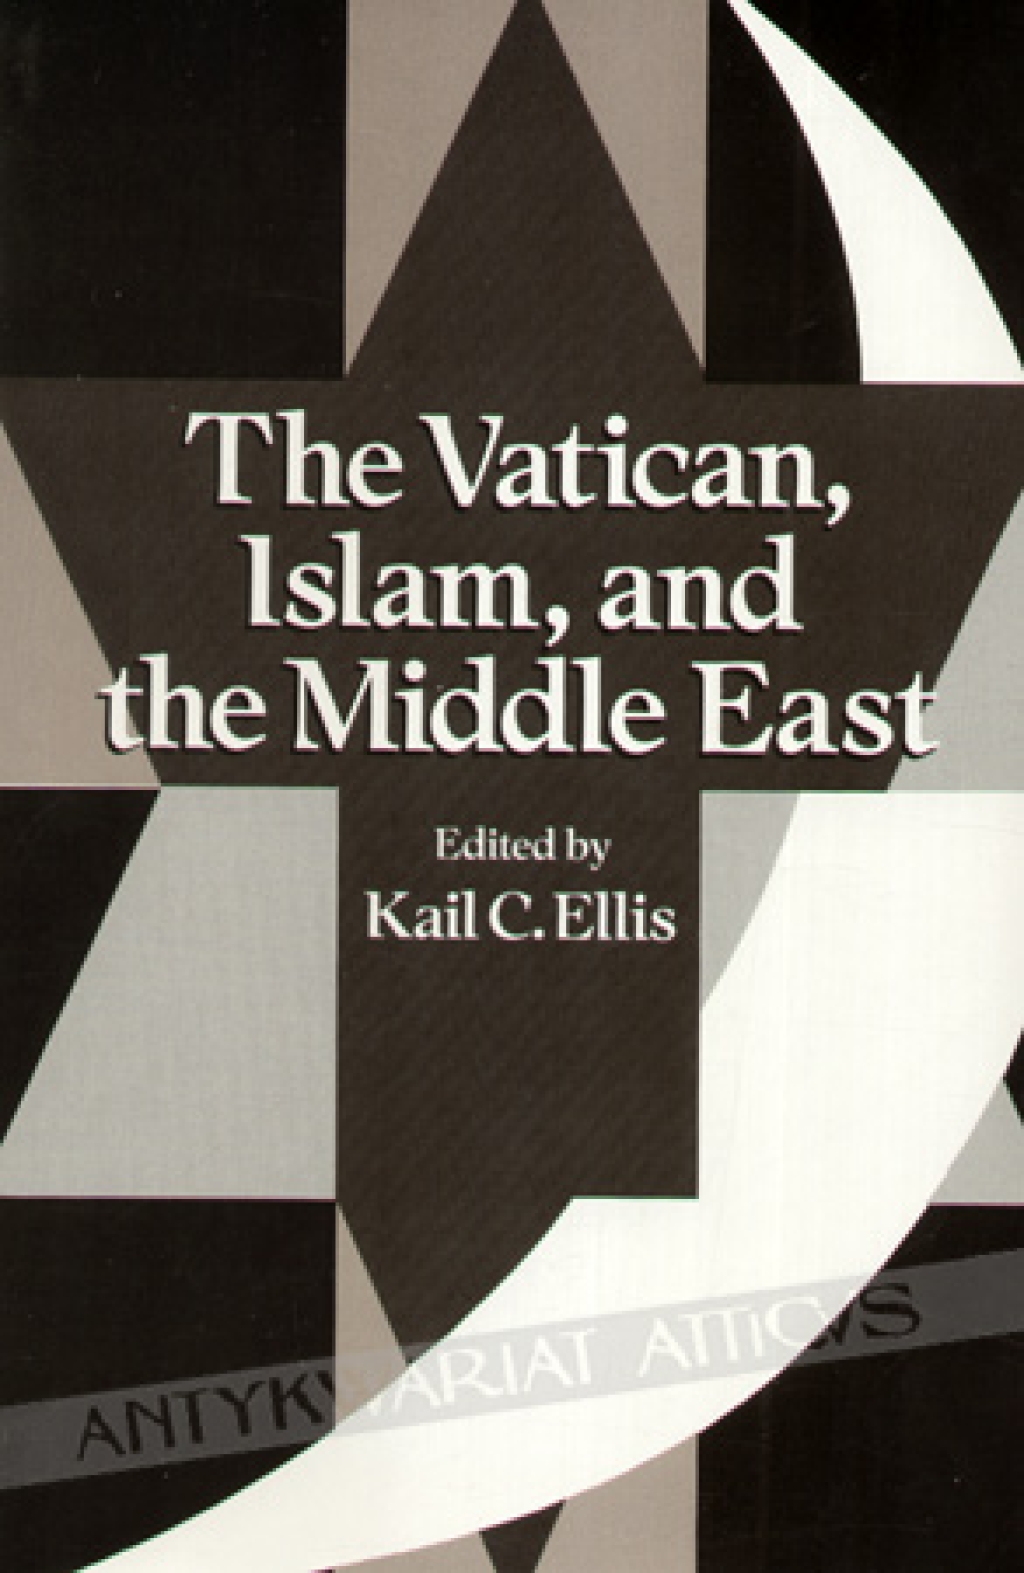 The Vatican, Islam, and the Middle East